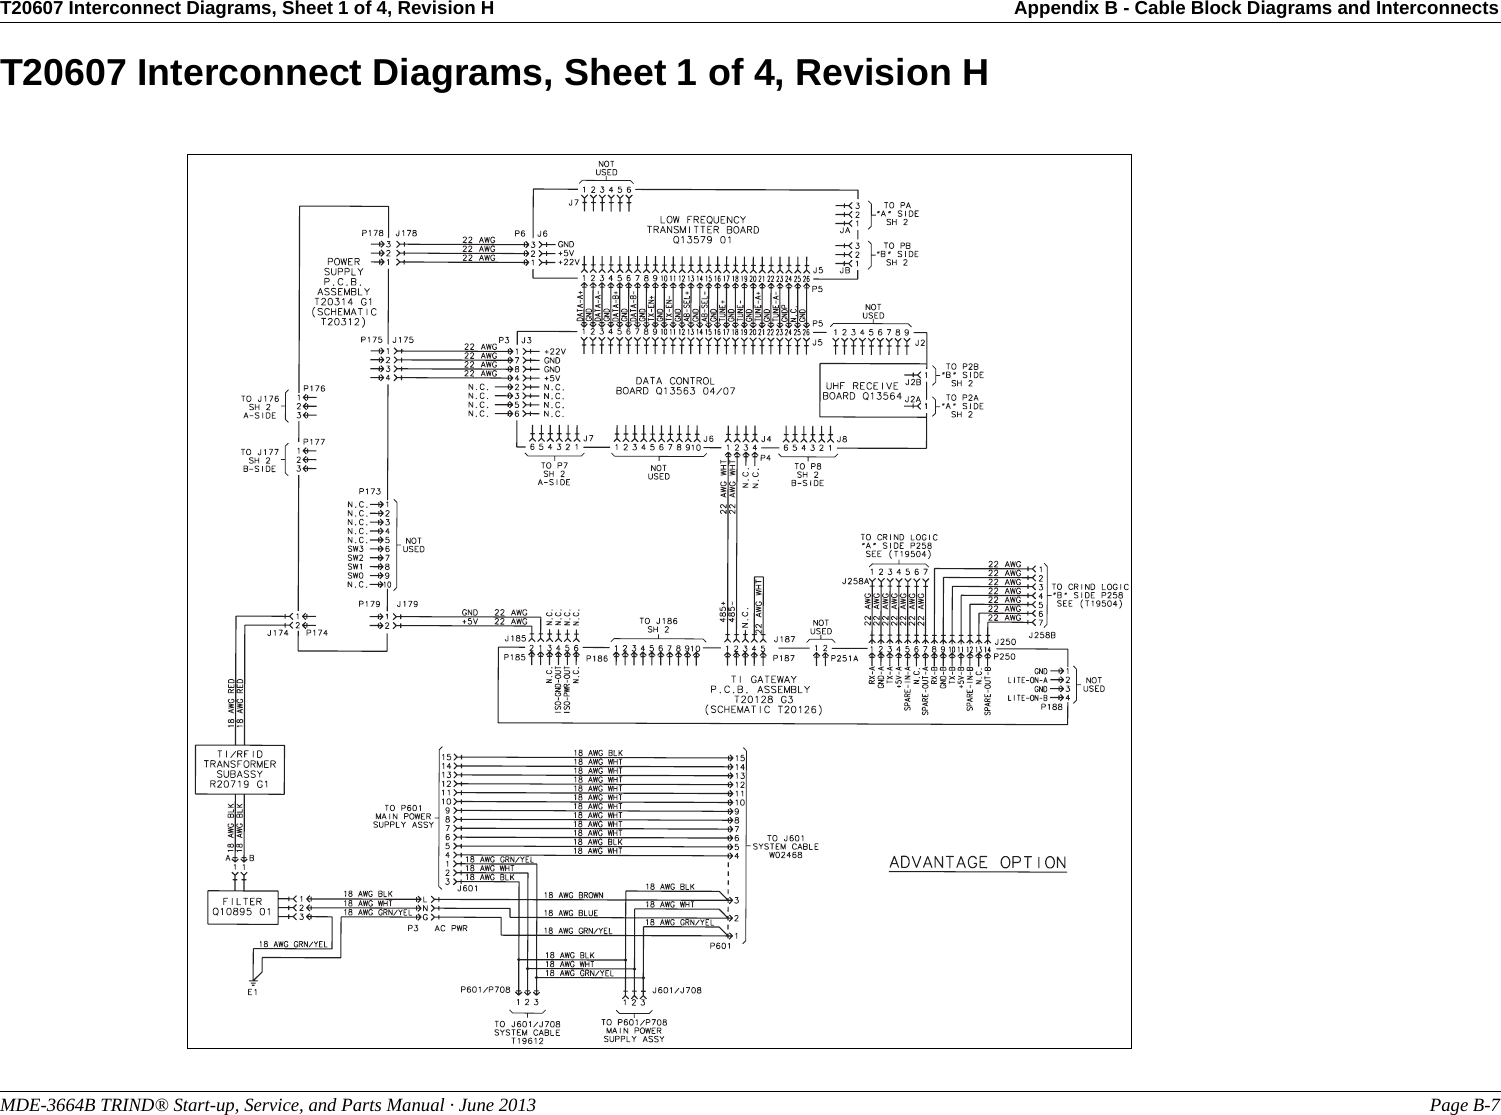 T20607 Interconnect Diagrams, Sheet 1 of 4, Revision H Appendix B - Cable Block Diagrams and InterconnectsMDE-3664B TRIND® Start-up, Service, and Parts Manual · June 2013 Page B-7T20607 Interconnect Diagrams, Sheet 1 of 4, Revision H